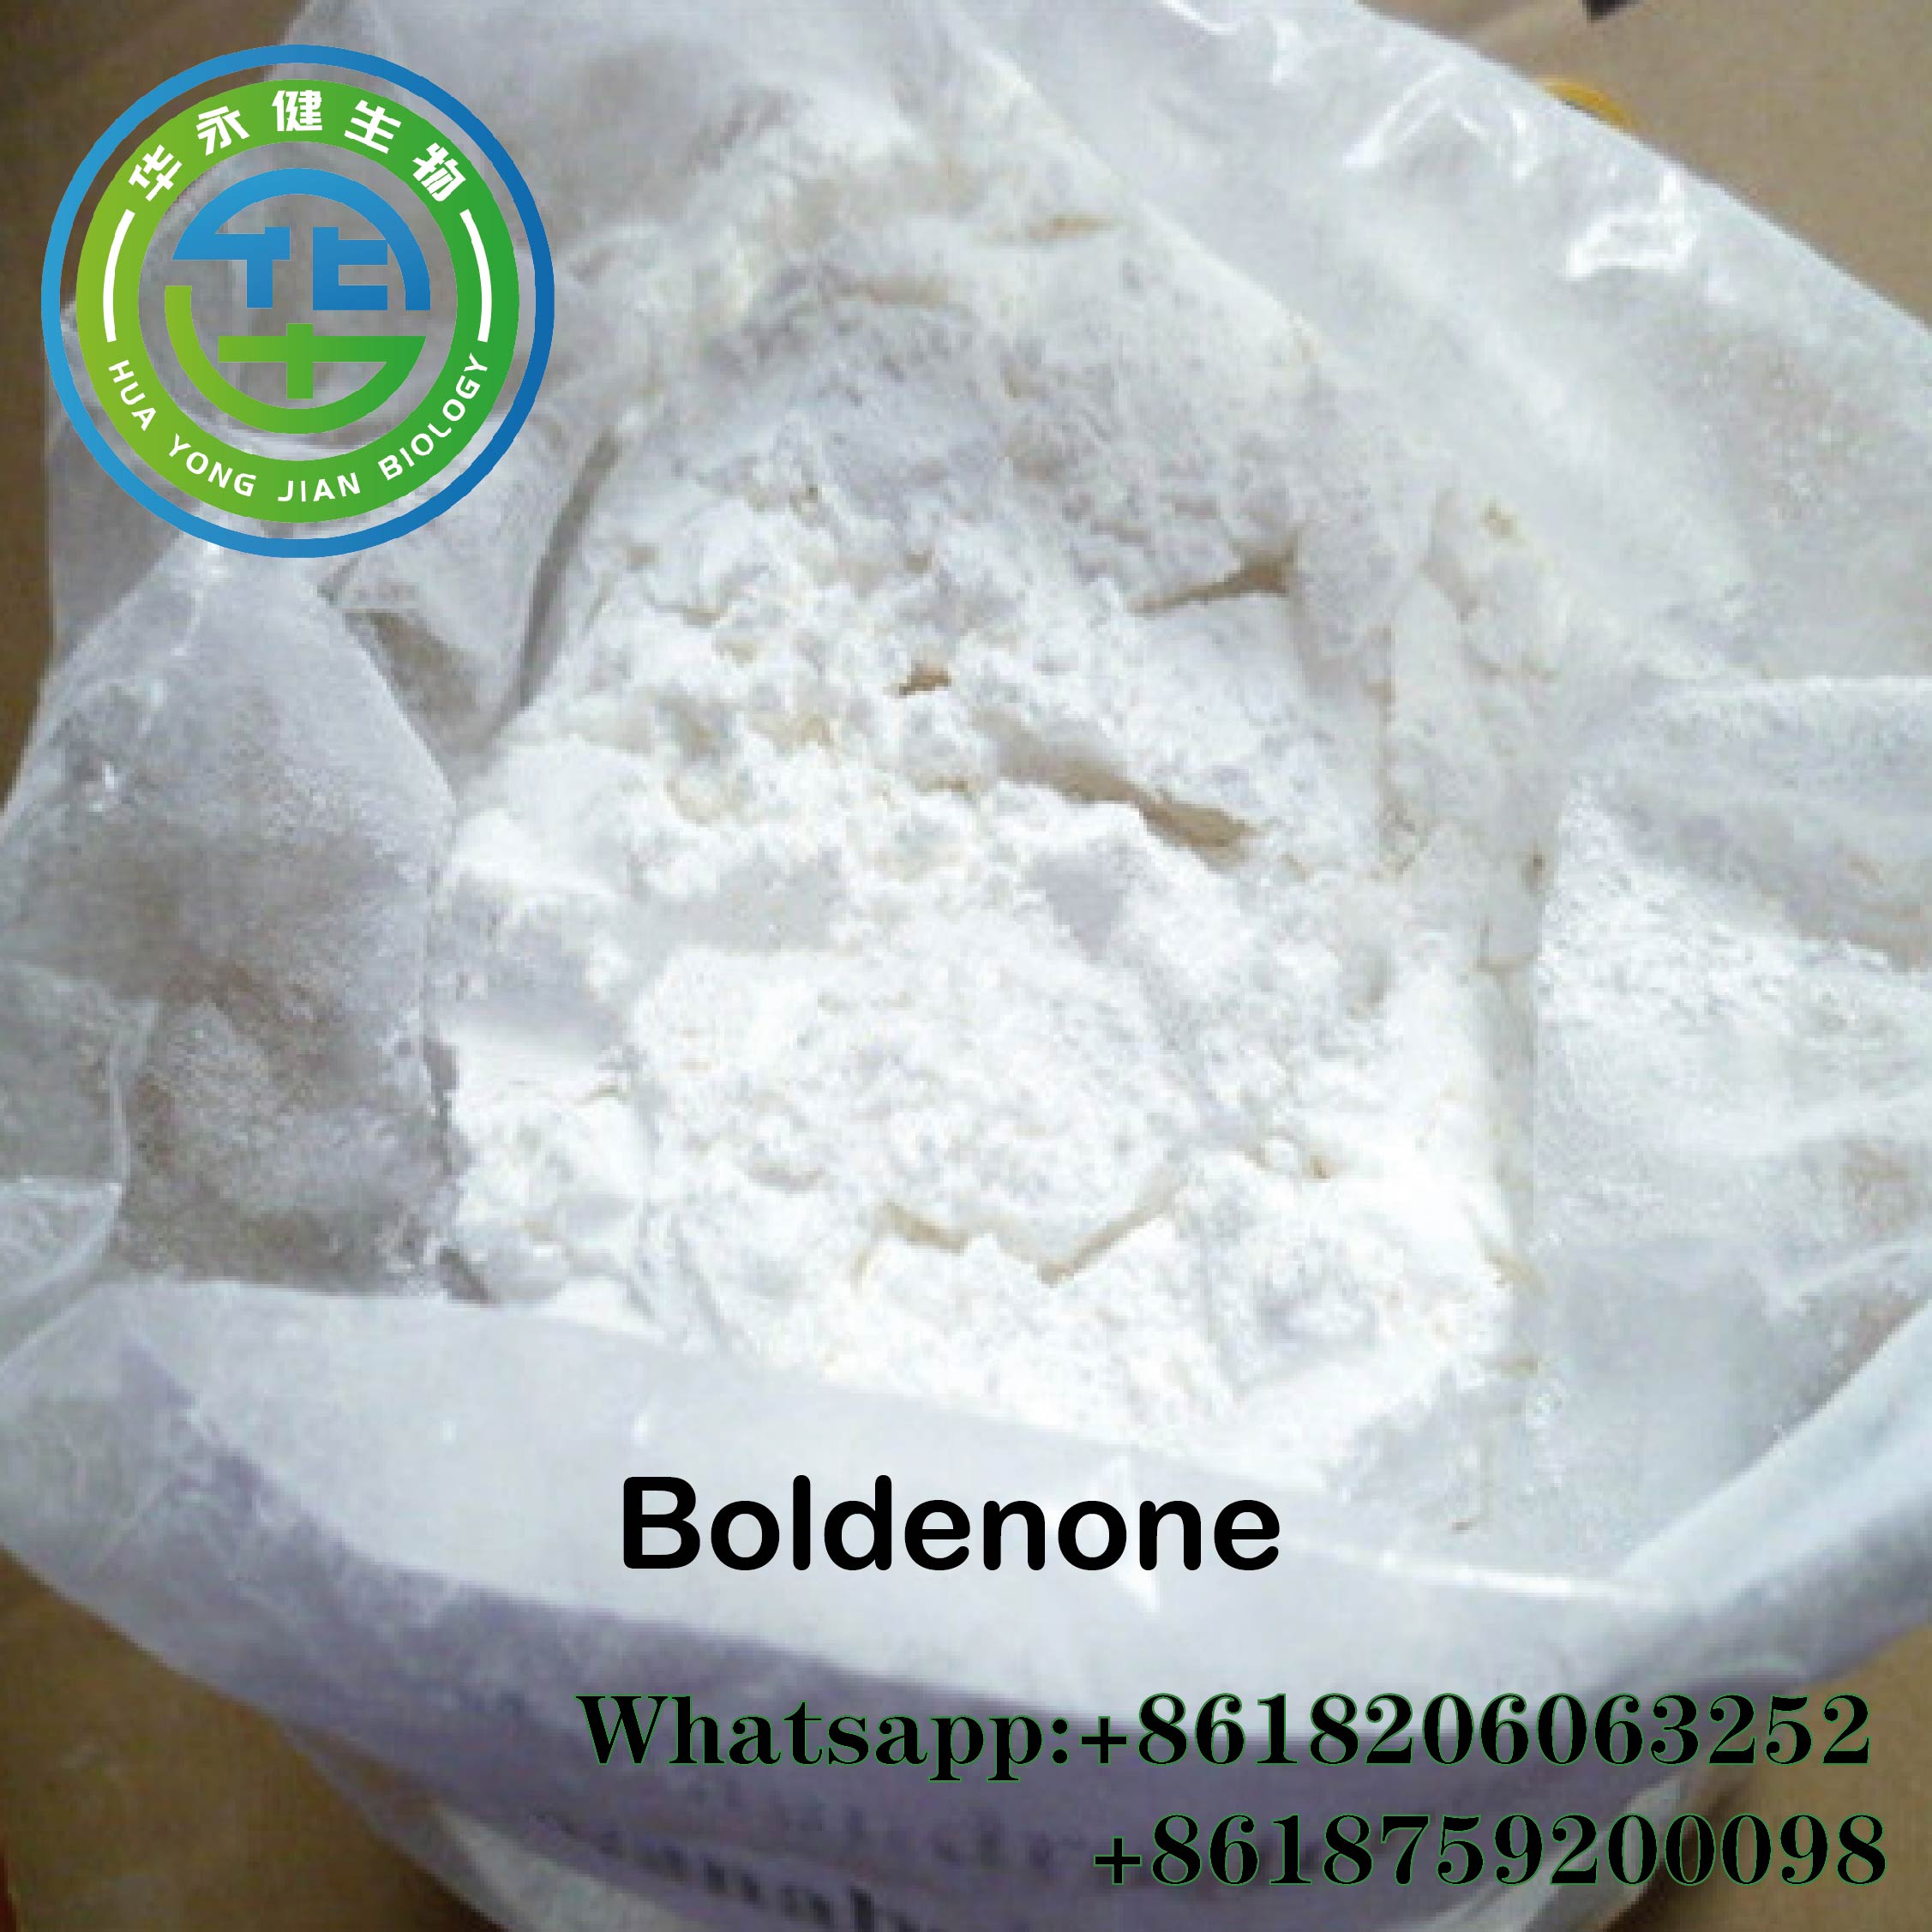 Boldenone Steroid Crystalline Powder for Male Building Muscle CAS 846-48-0 